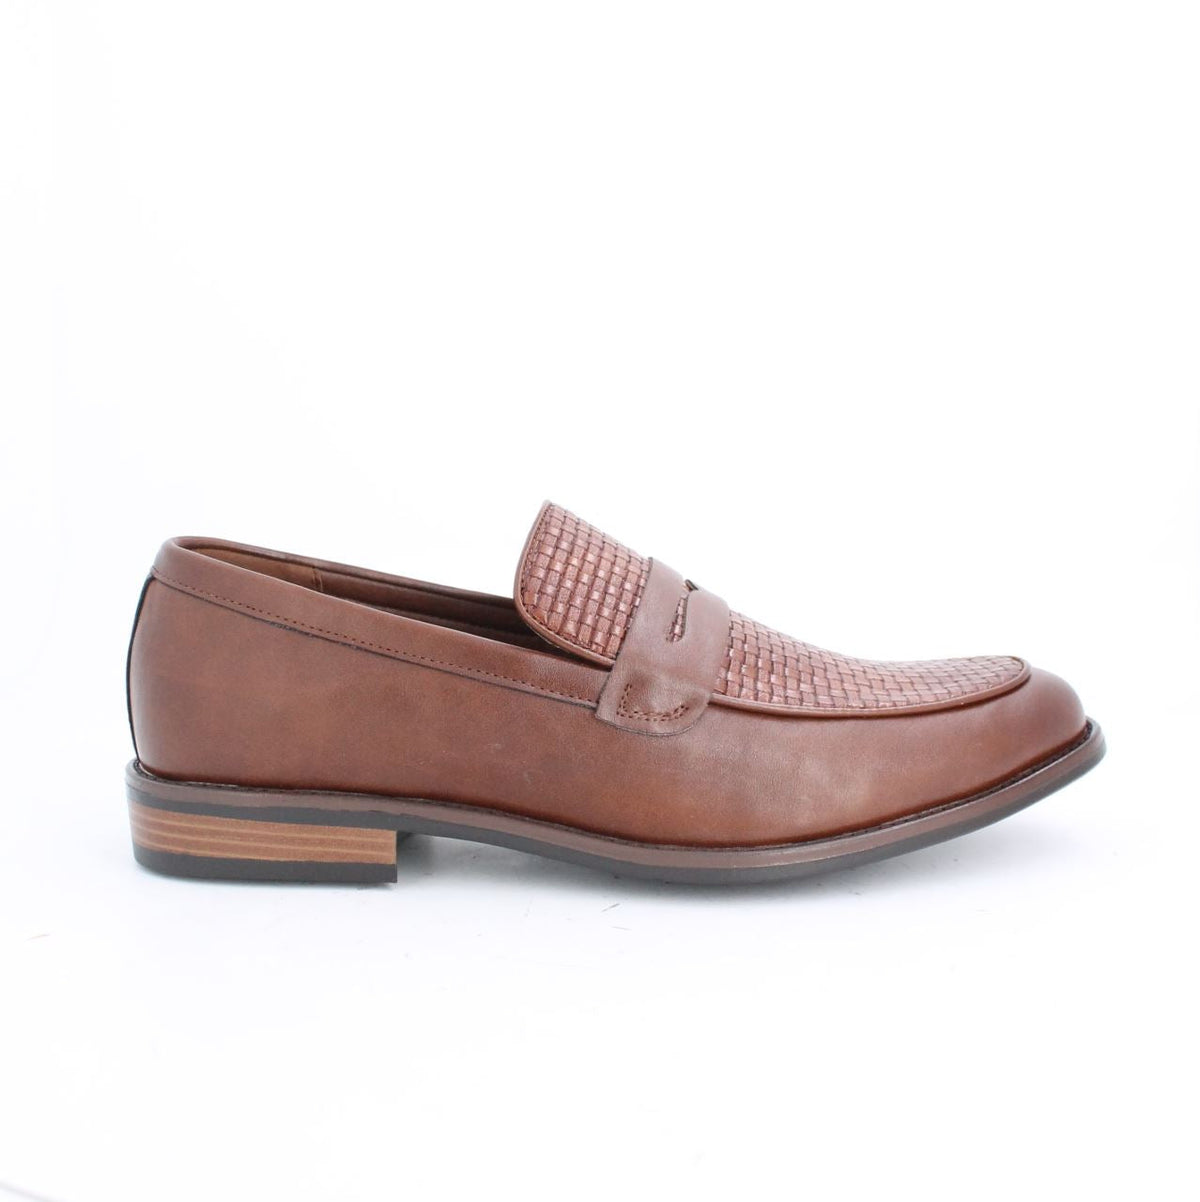 TORRS LOAFERS-TAN